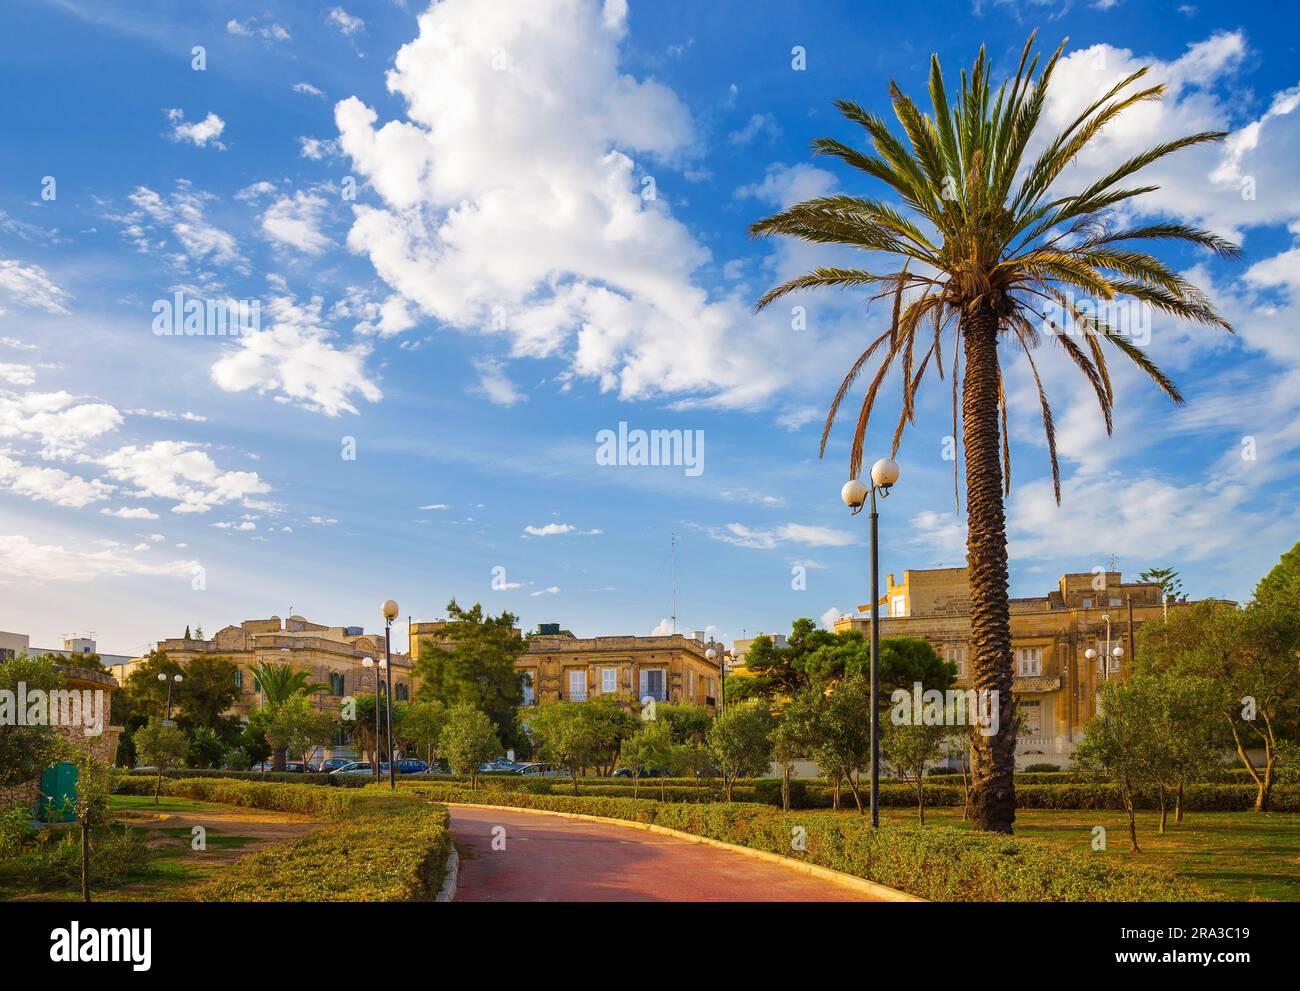 Sliema, Malta - Palm tree, traditional Maltese houses and blue sky and clouds on a sunny morning Stock Photo